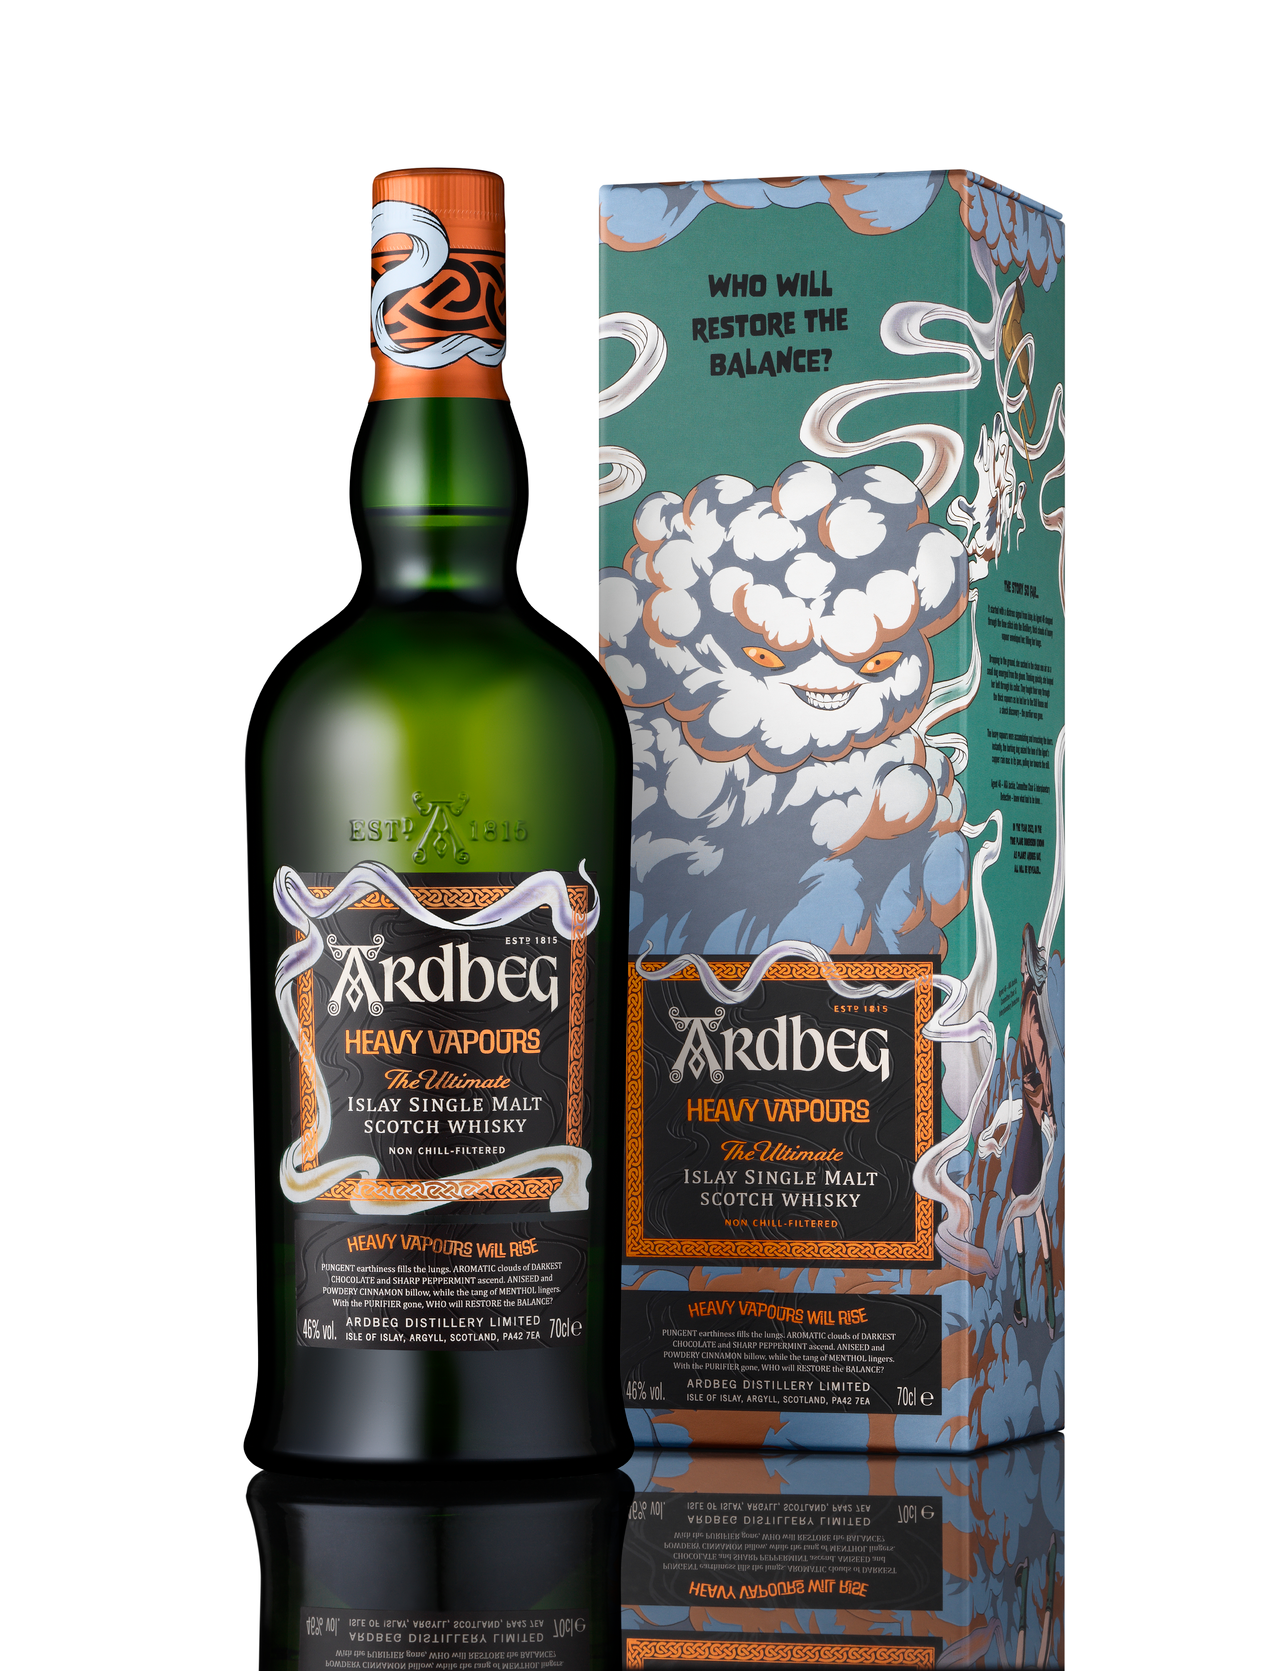 Ardbeg Heavy Vapours Limited Edition + Wee Beastie 5 Years Old